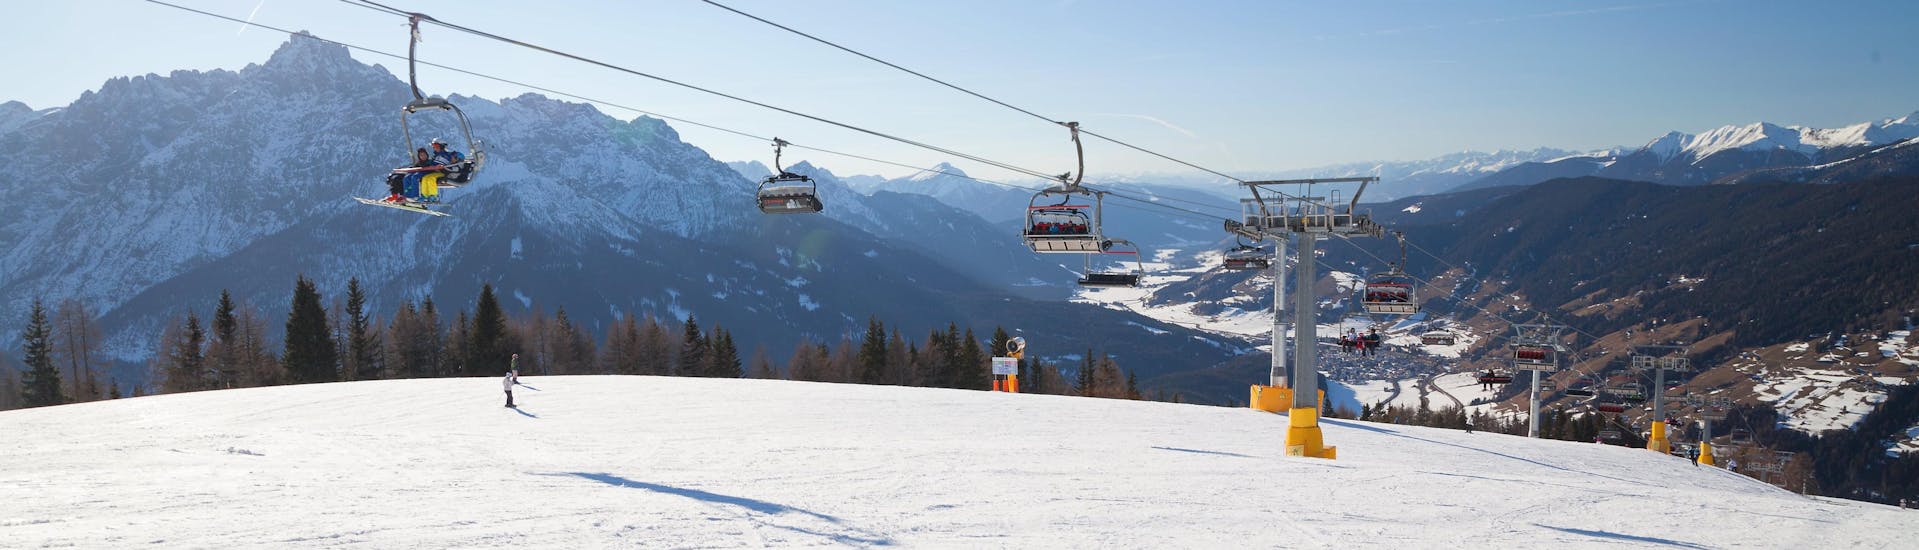 Skiers on the slopes and in the ski lift in Versciaco - Monte Elmo in Italy.